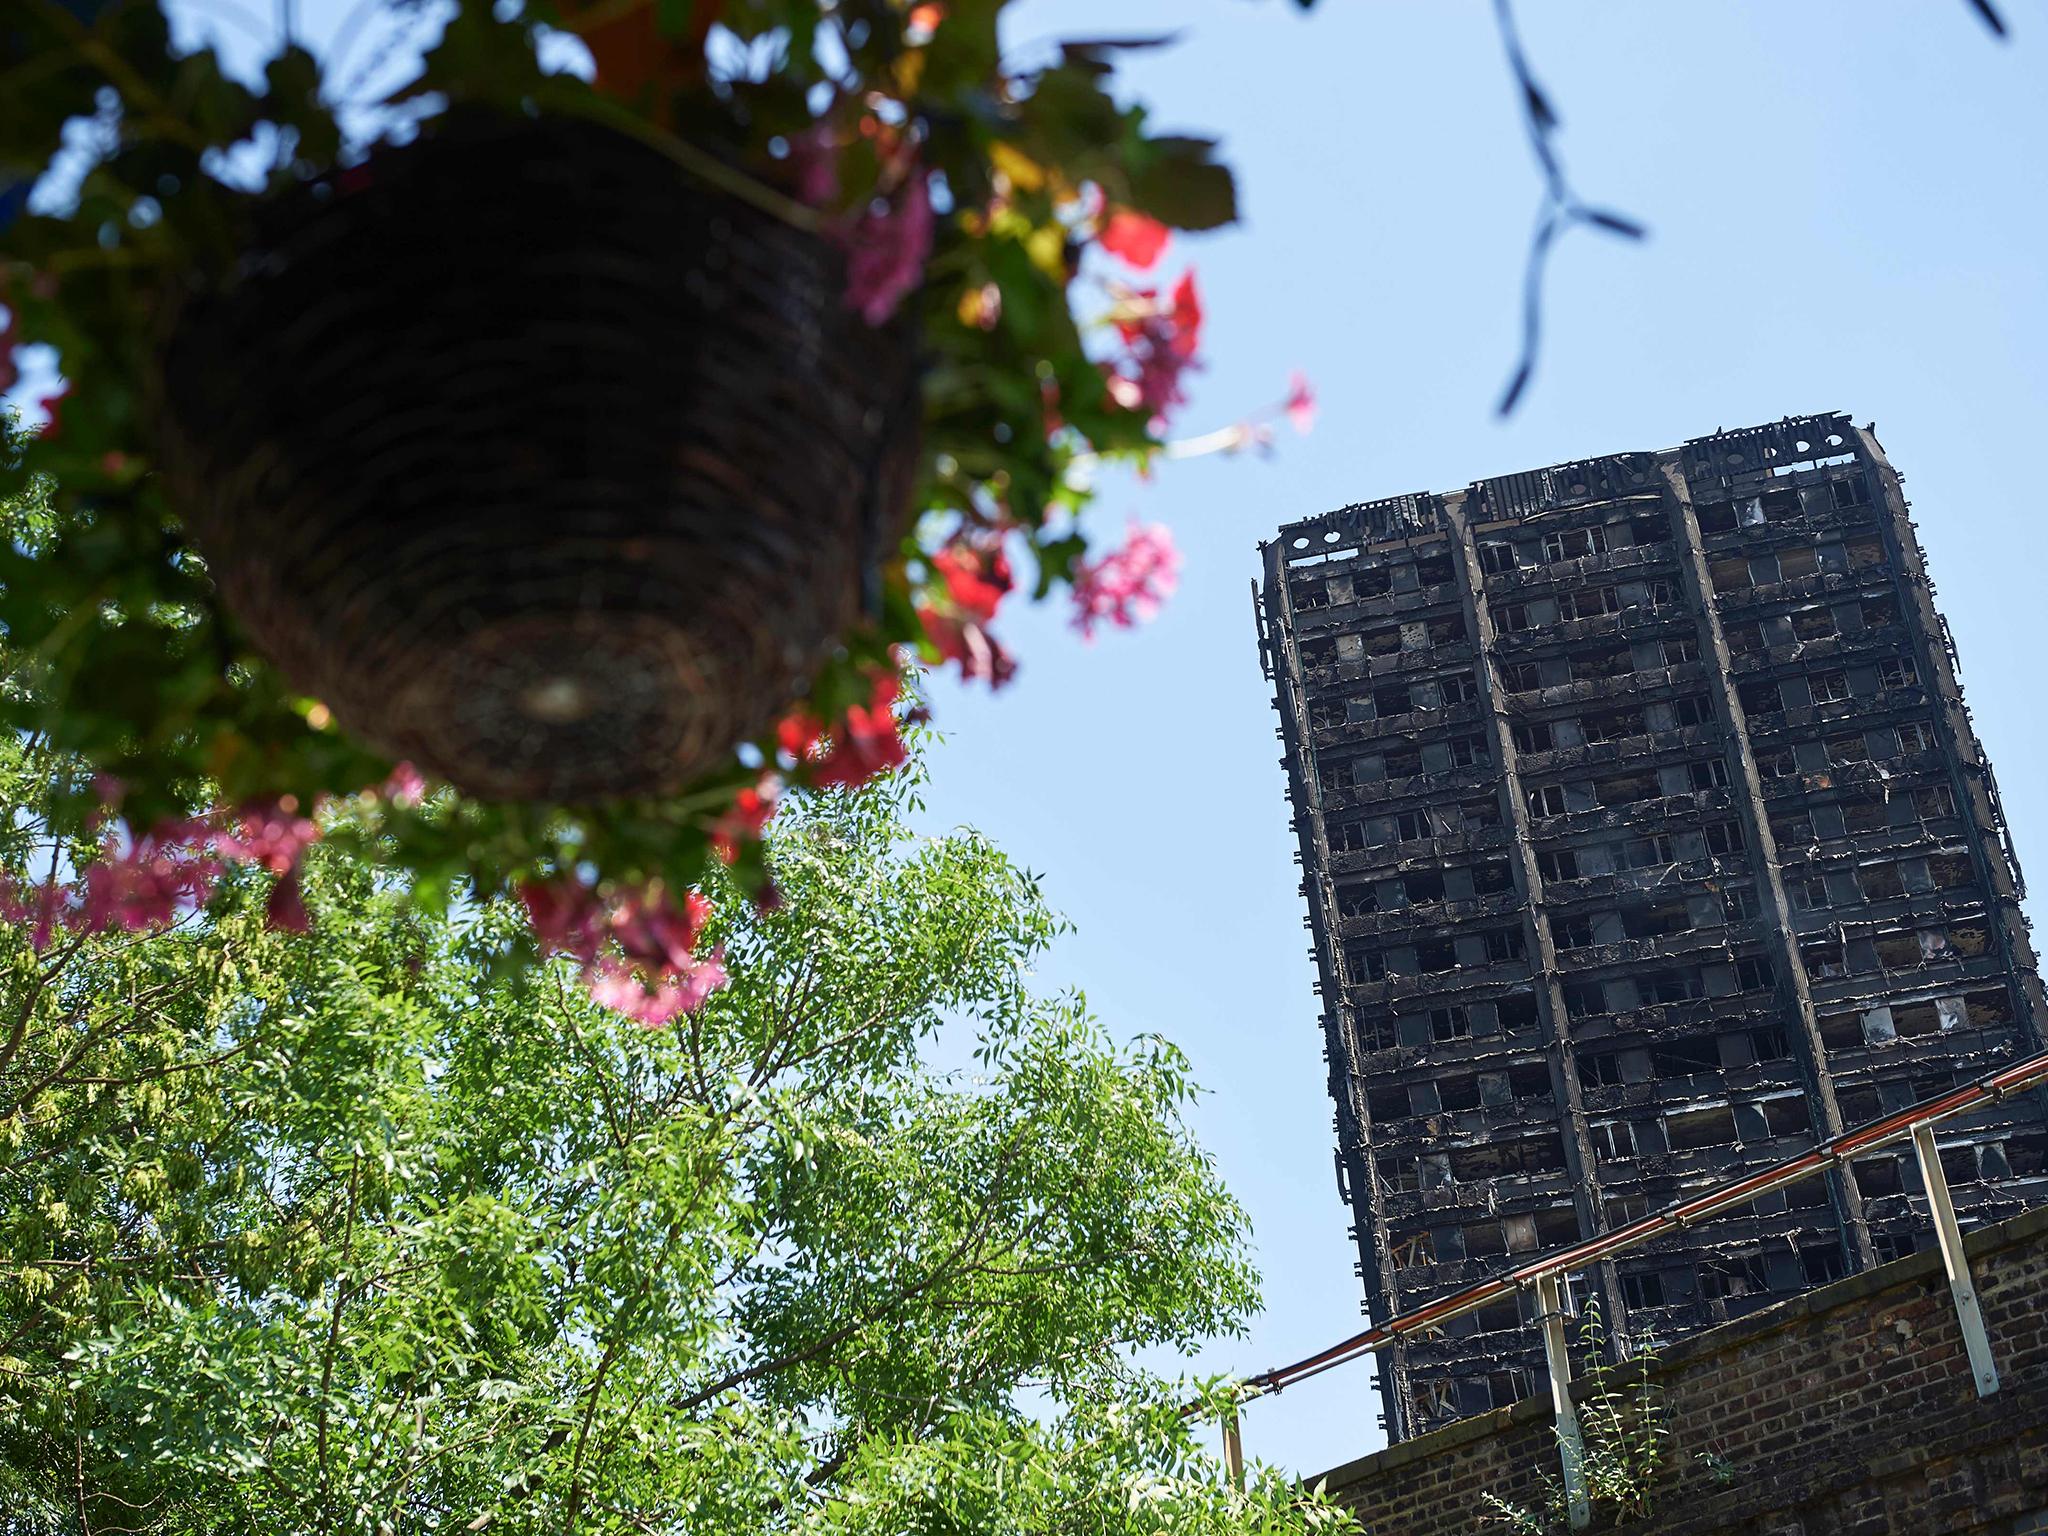 The burned-out shell of the Grenfell Tower blockin Kensington, west London